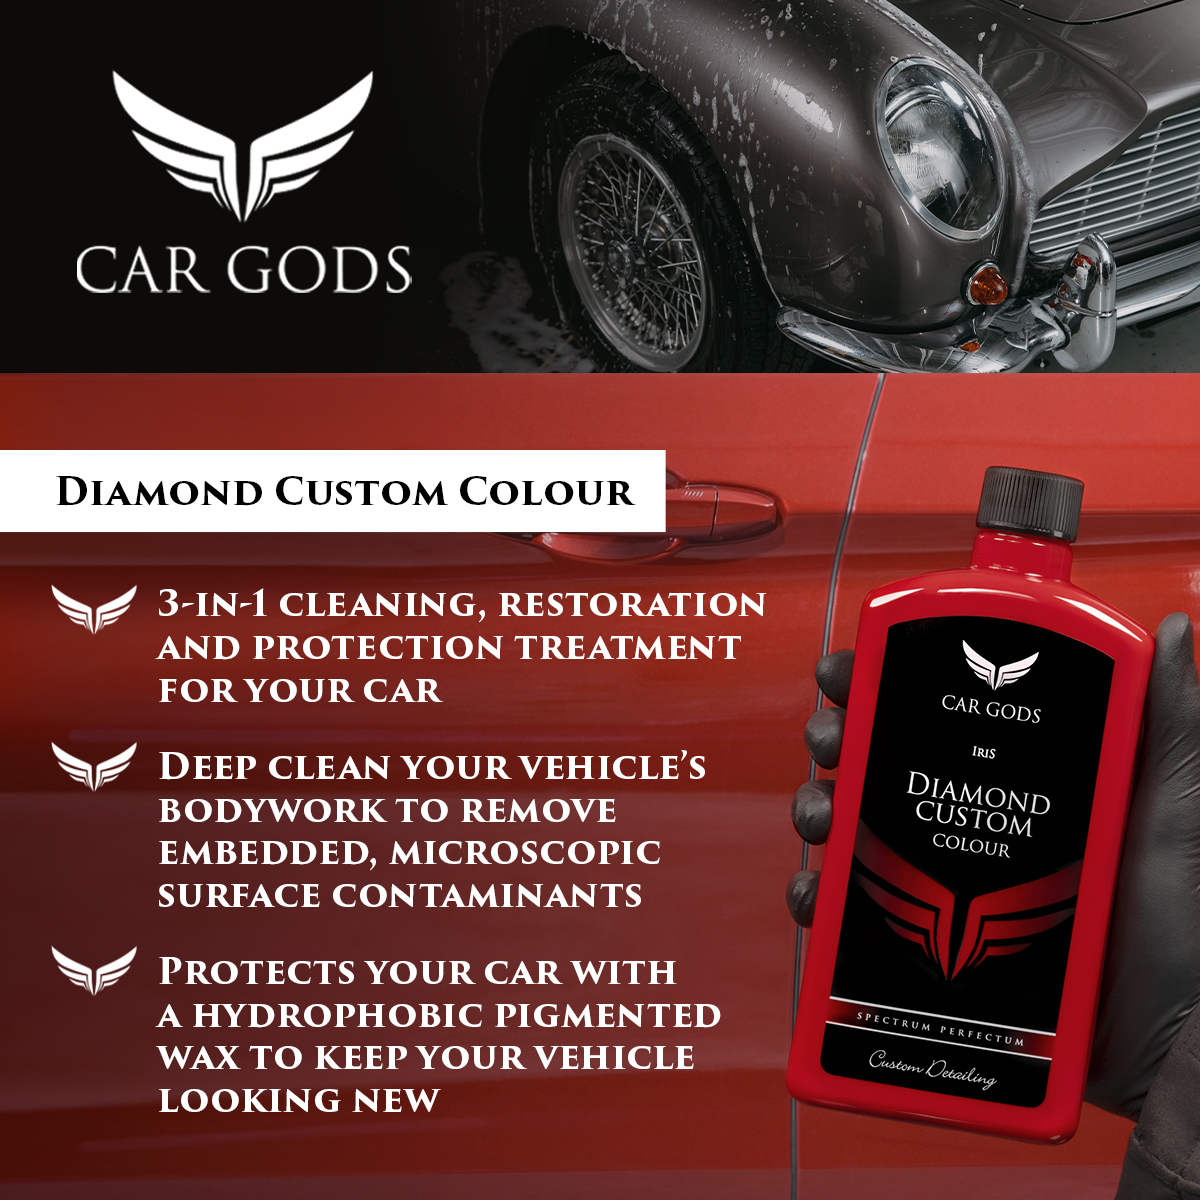 Car Gods Diamond Custom Colour. 3-in-1 cleaning, restoration and protection treatment for your car. Deep clean your vehicle’s bodywork to remove embedded, microscopic surface contaminants. Diamond Custom Colour restores paintwork by gently removing surface oxidation, blemishes and minor scratches, and it protects your car with a hydrophobic pigmented wax to keep your vehicle looking new.